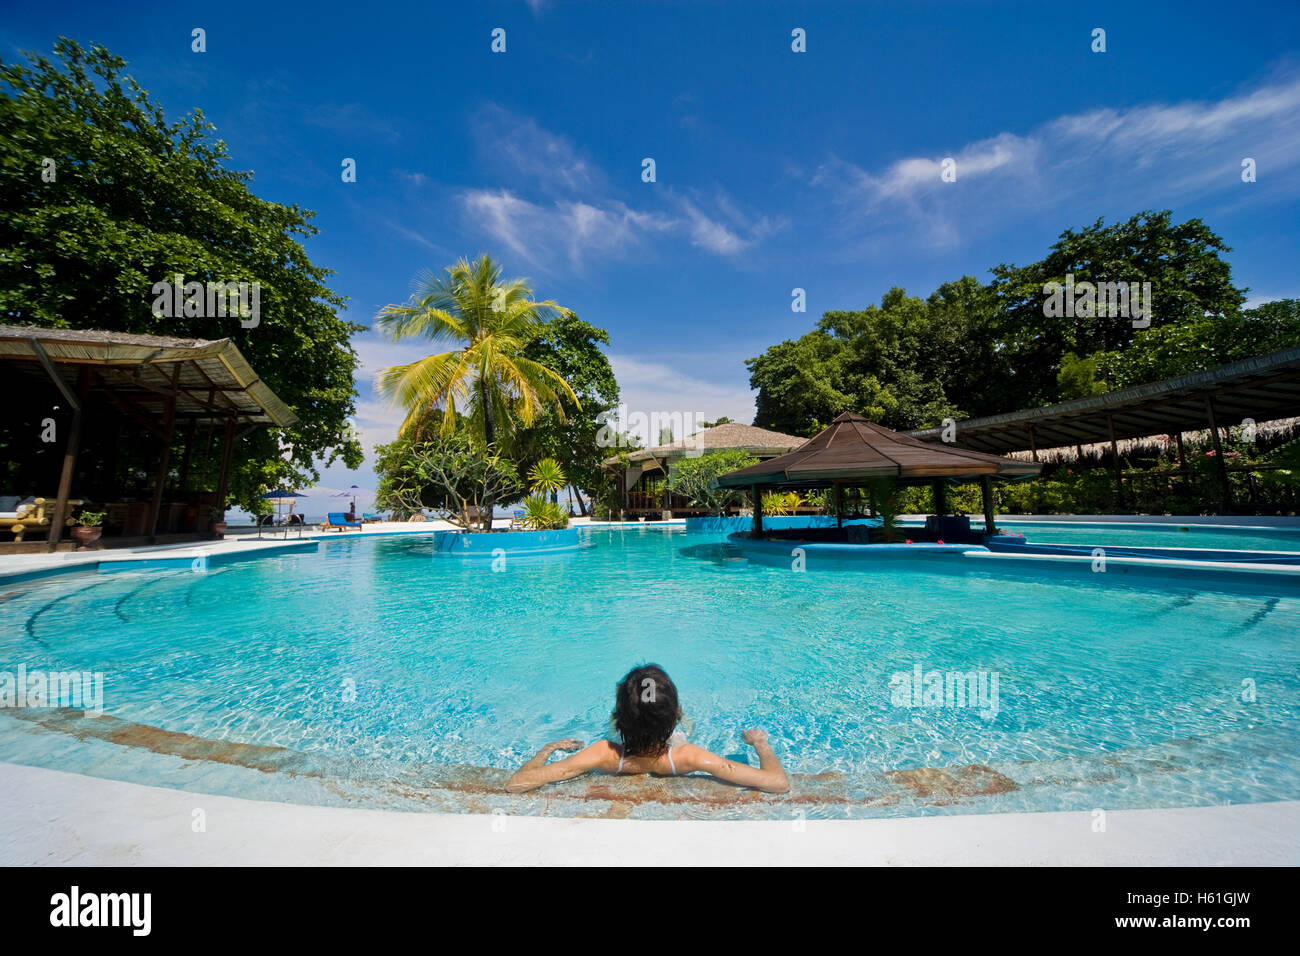 Young woman relaxing in swimming pool, Siladen island, Sulawesi, Indonesia, Southeast Asia Stock Photo